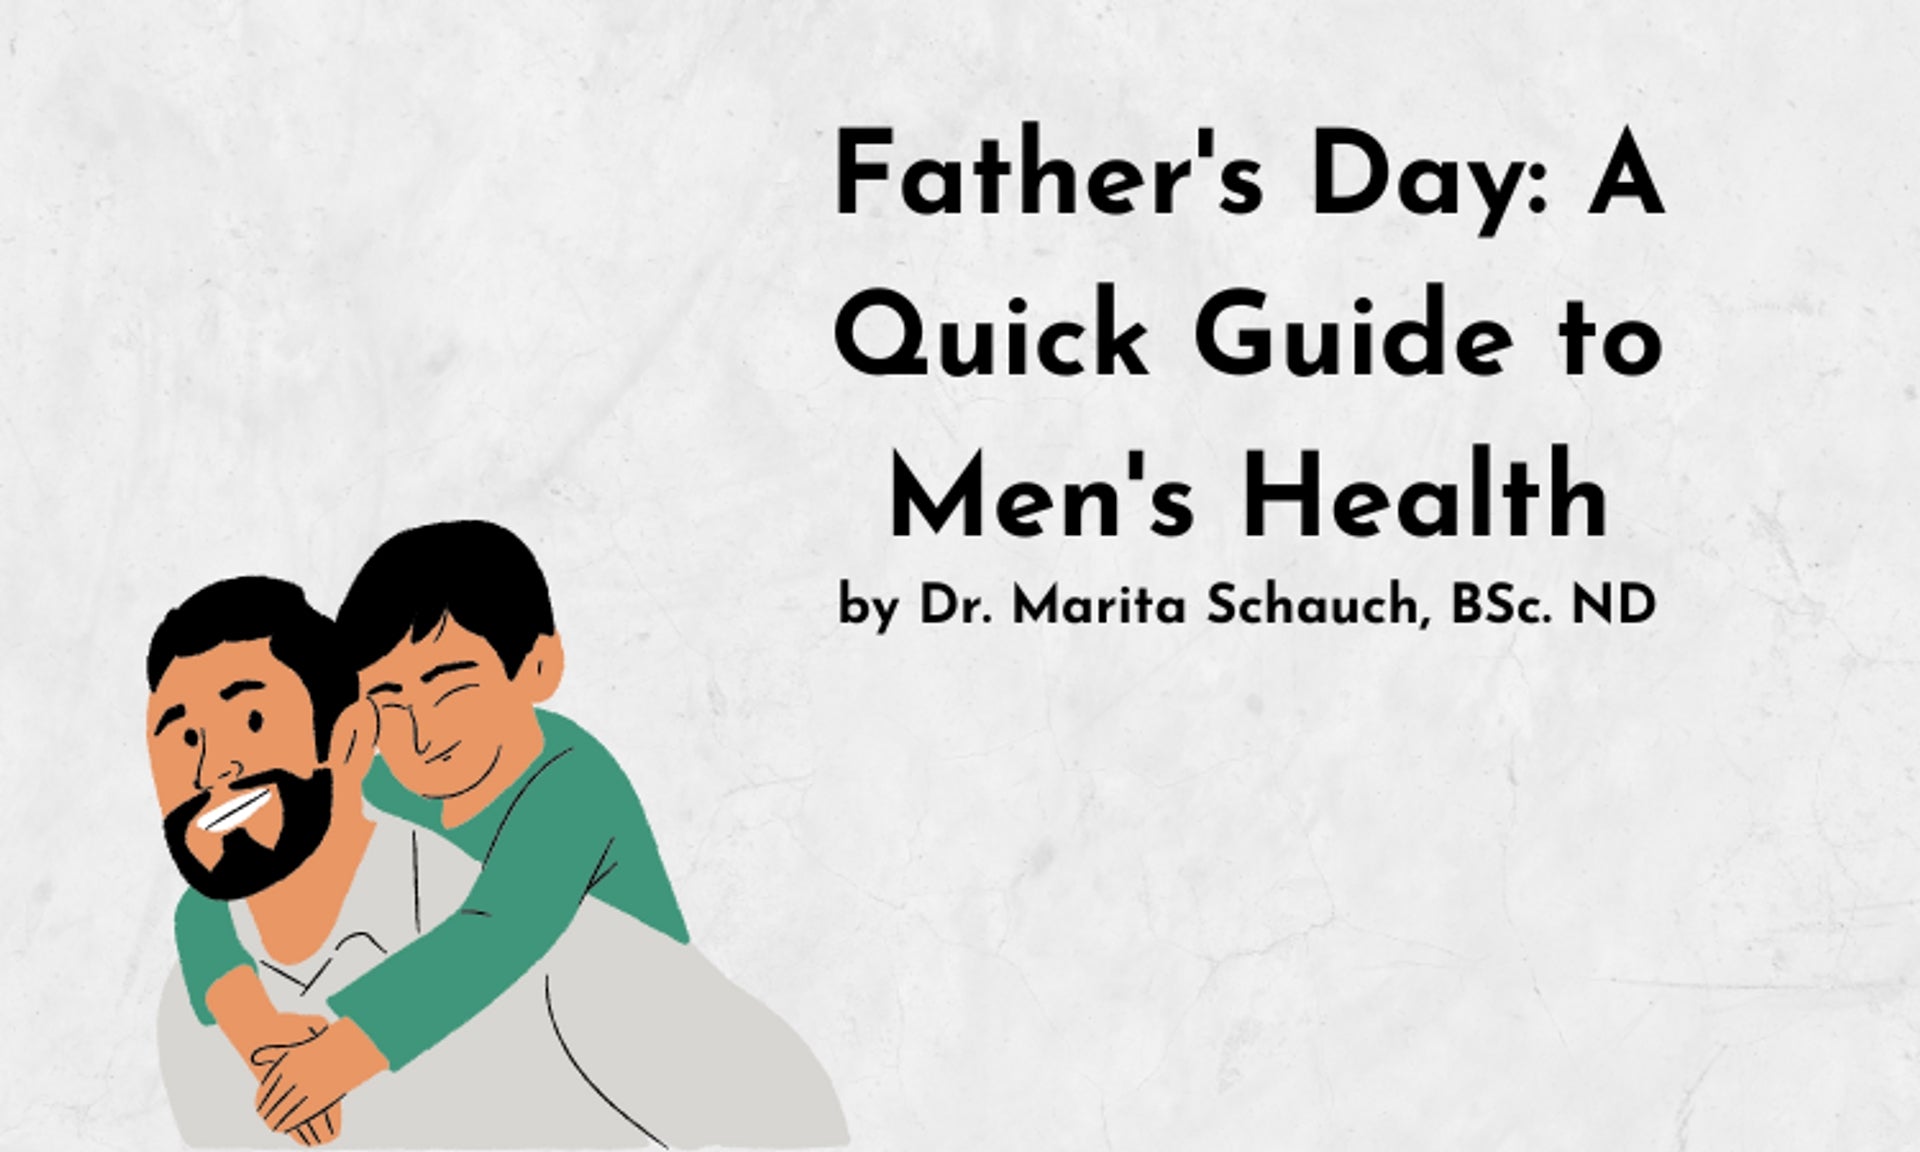 Father's Day: A Quick Guide to Men's Health